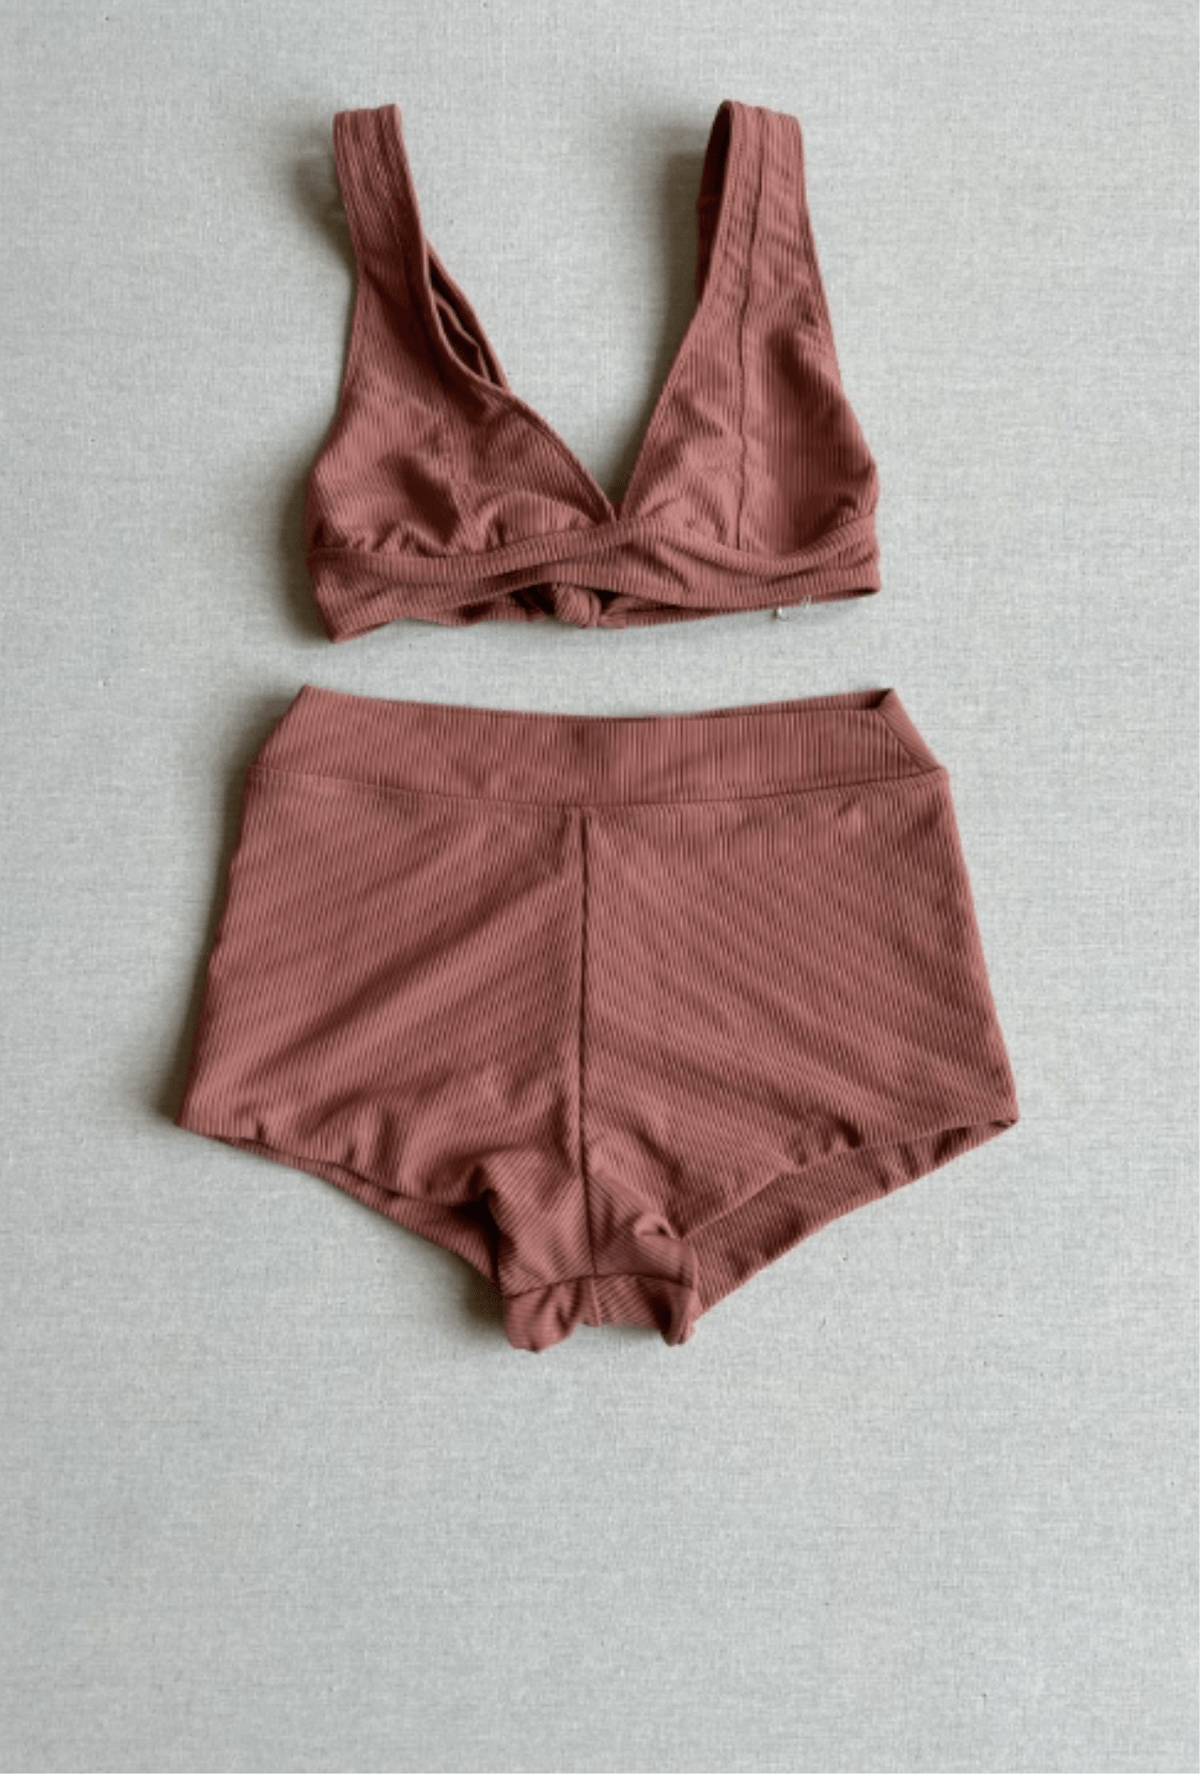 The Rachael Top + Sutton Short in Rose Dawn Rib (Size Large)